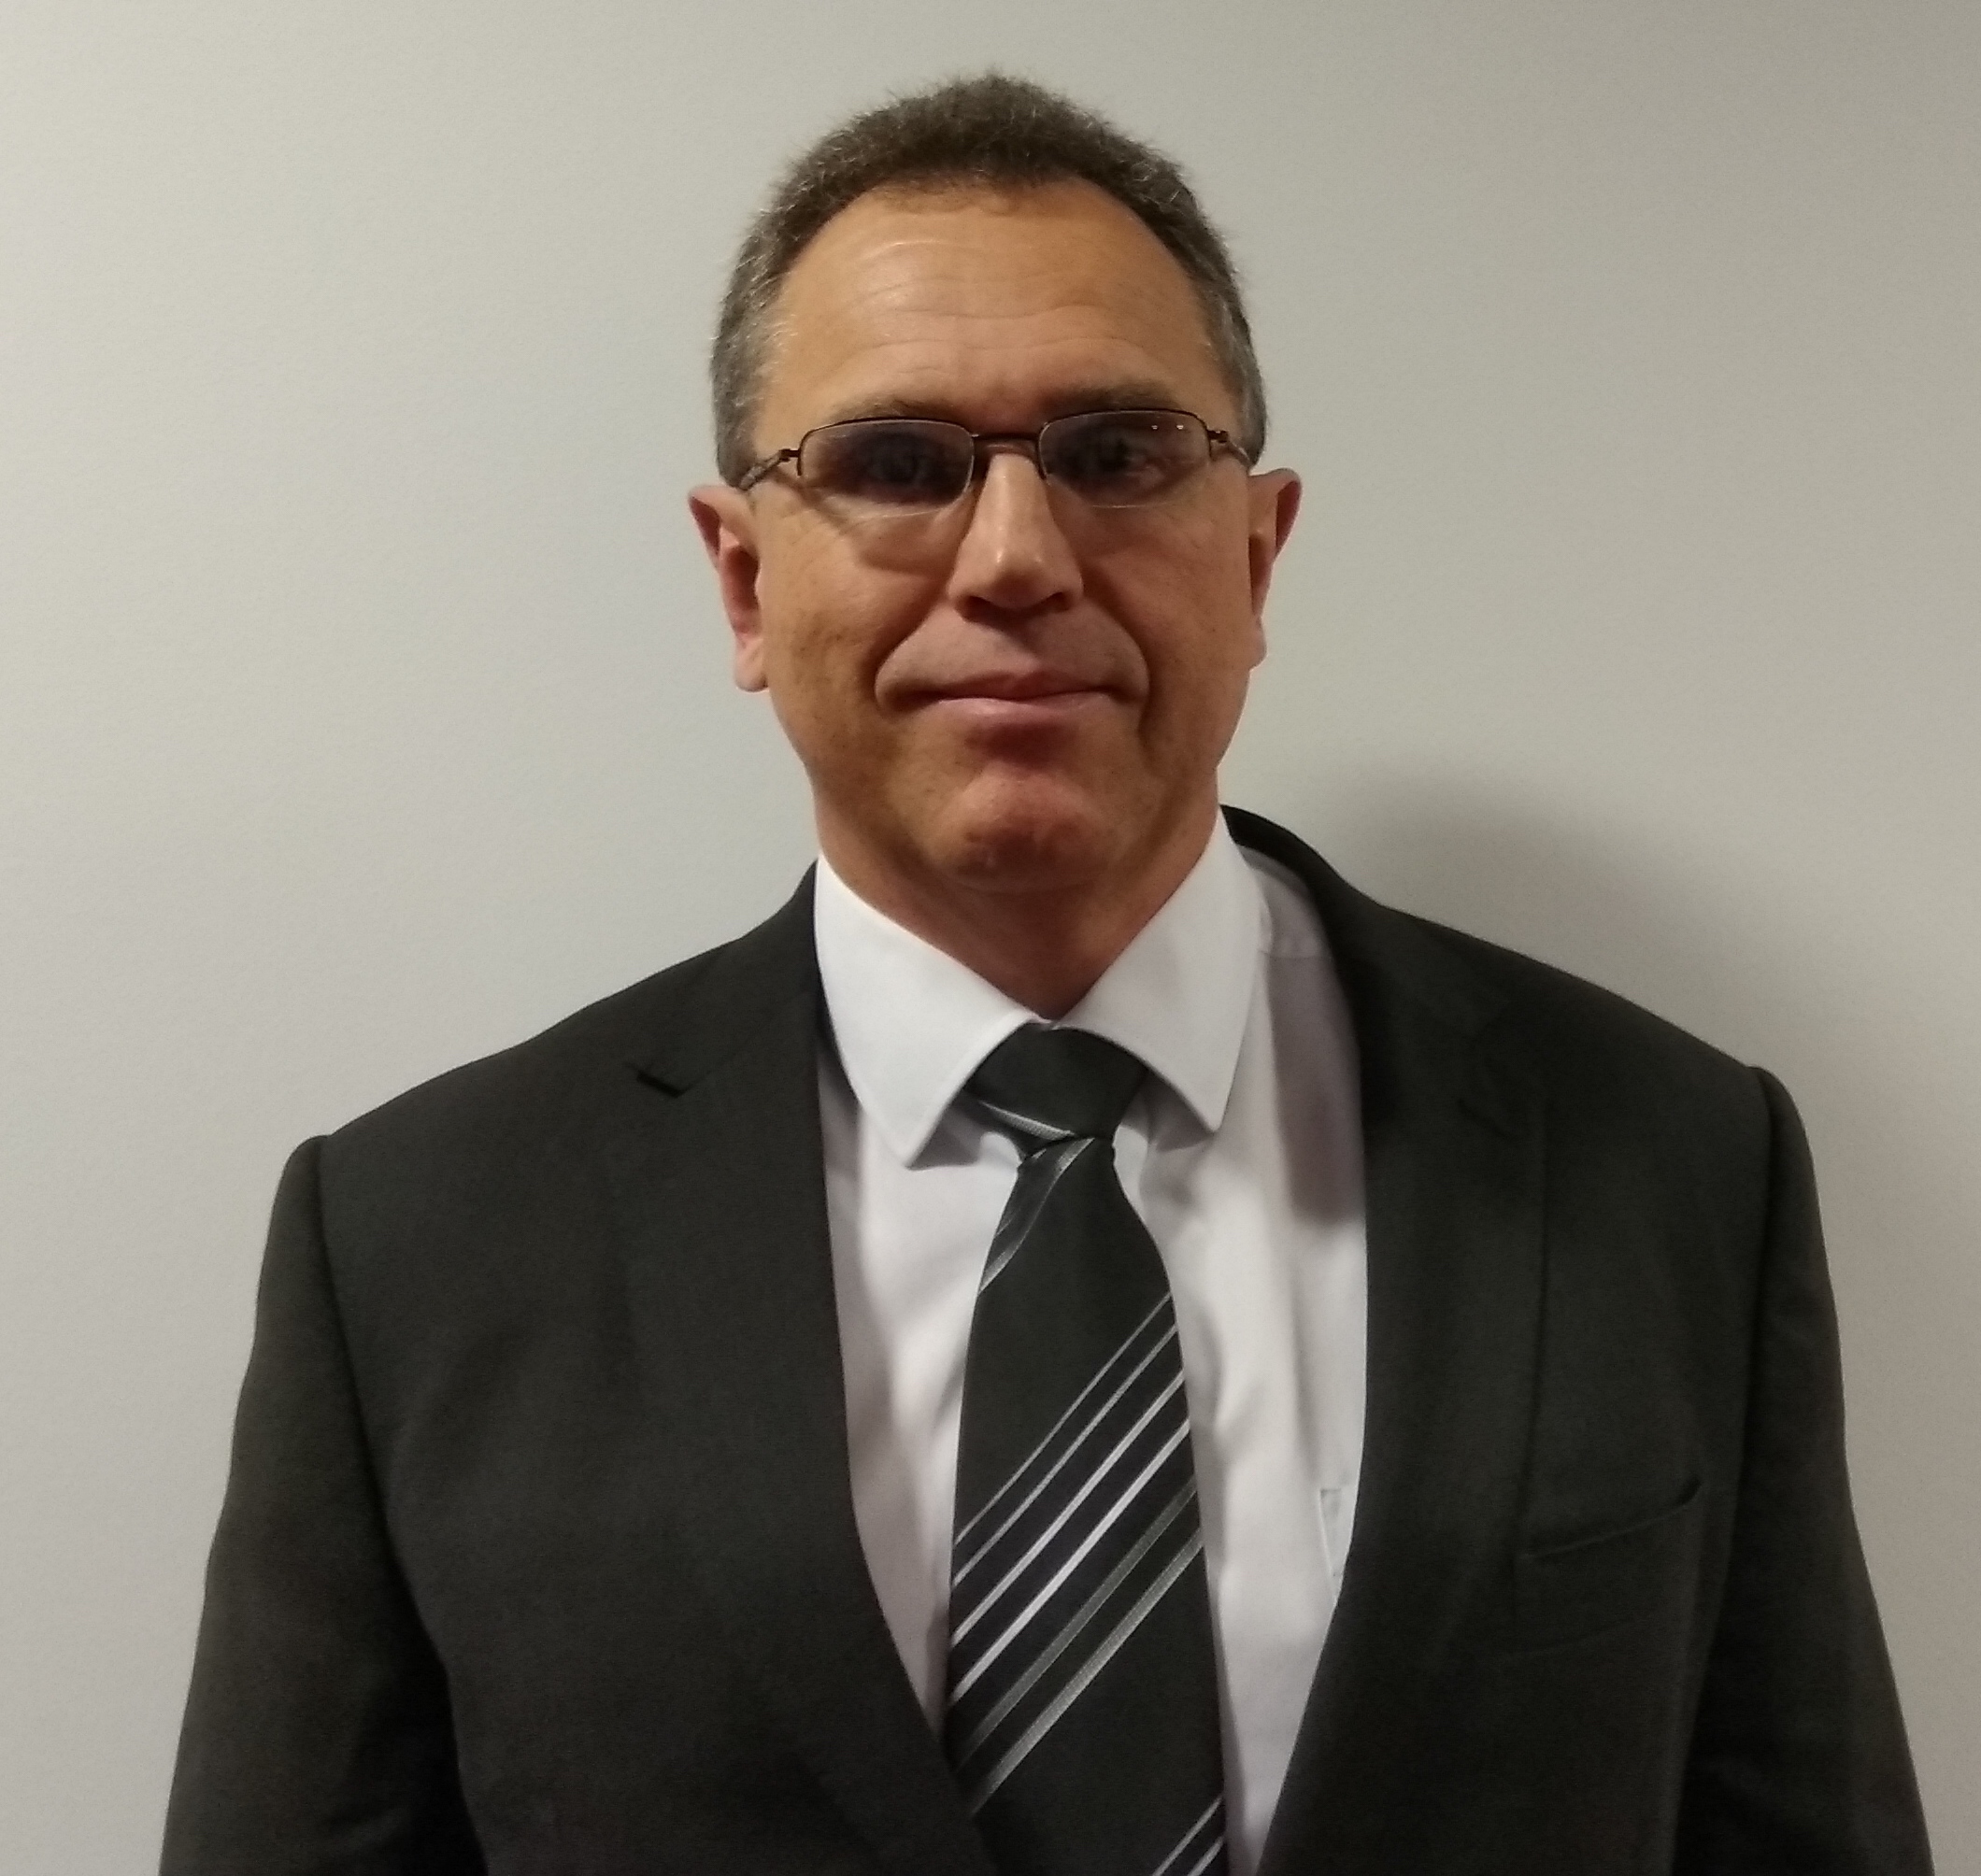 Paulo Rodrigues - Cyber Security Specialist and Solutions Architect at Fortinet UK&I 